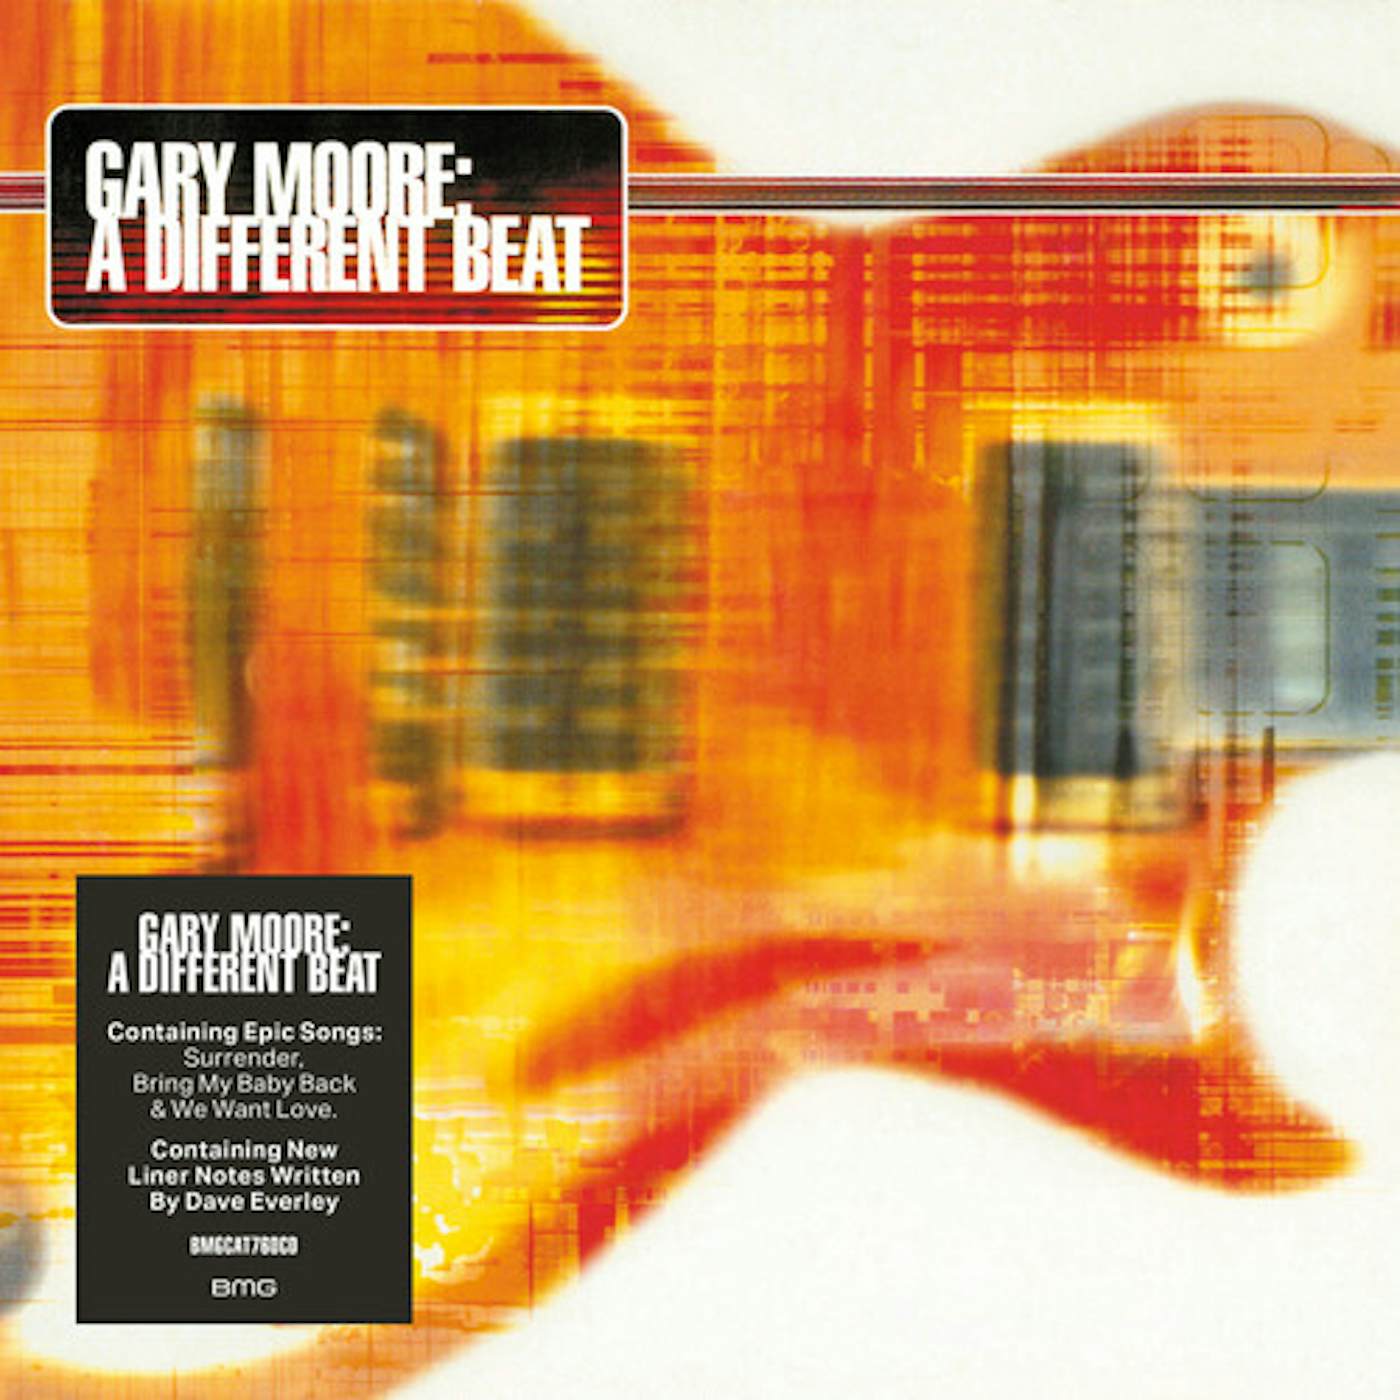 Gary Moore DIFFERENT BEAT CD